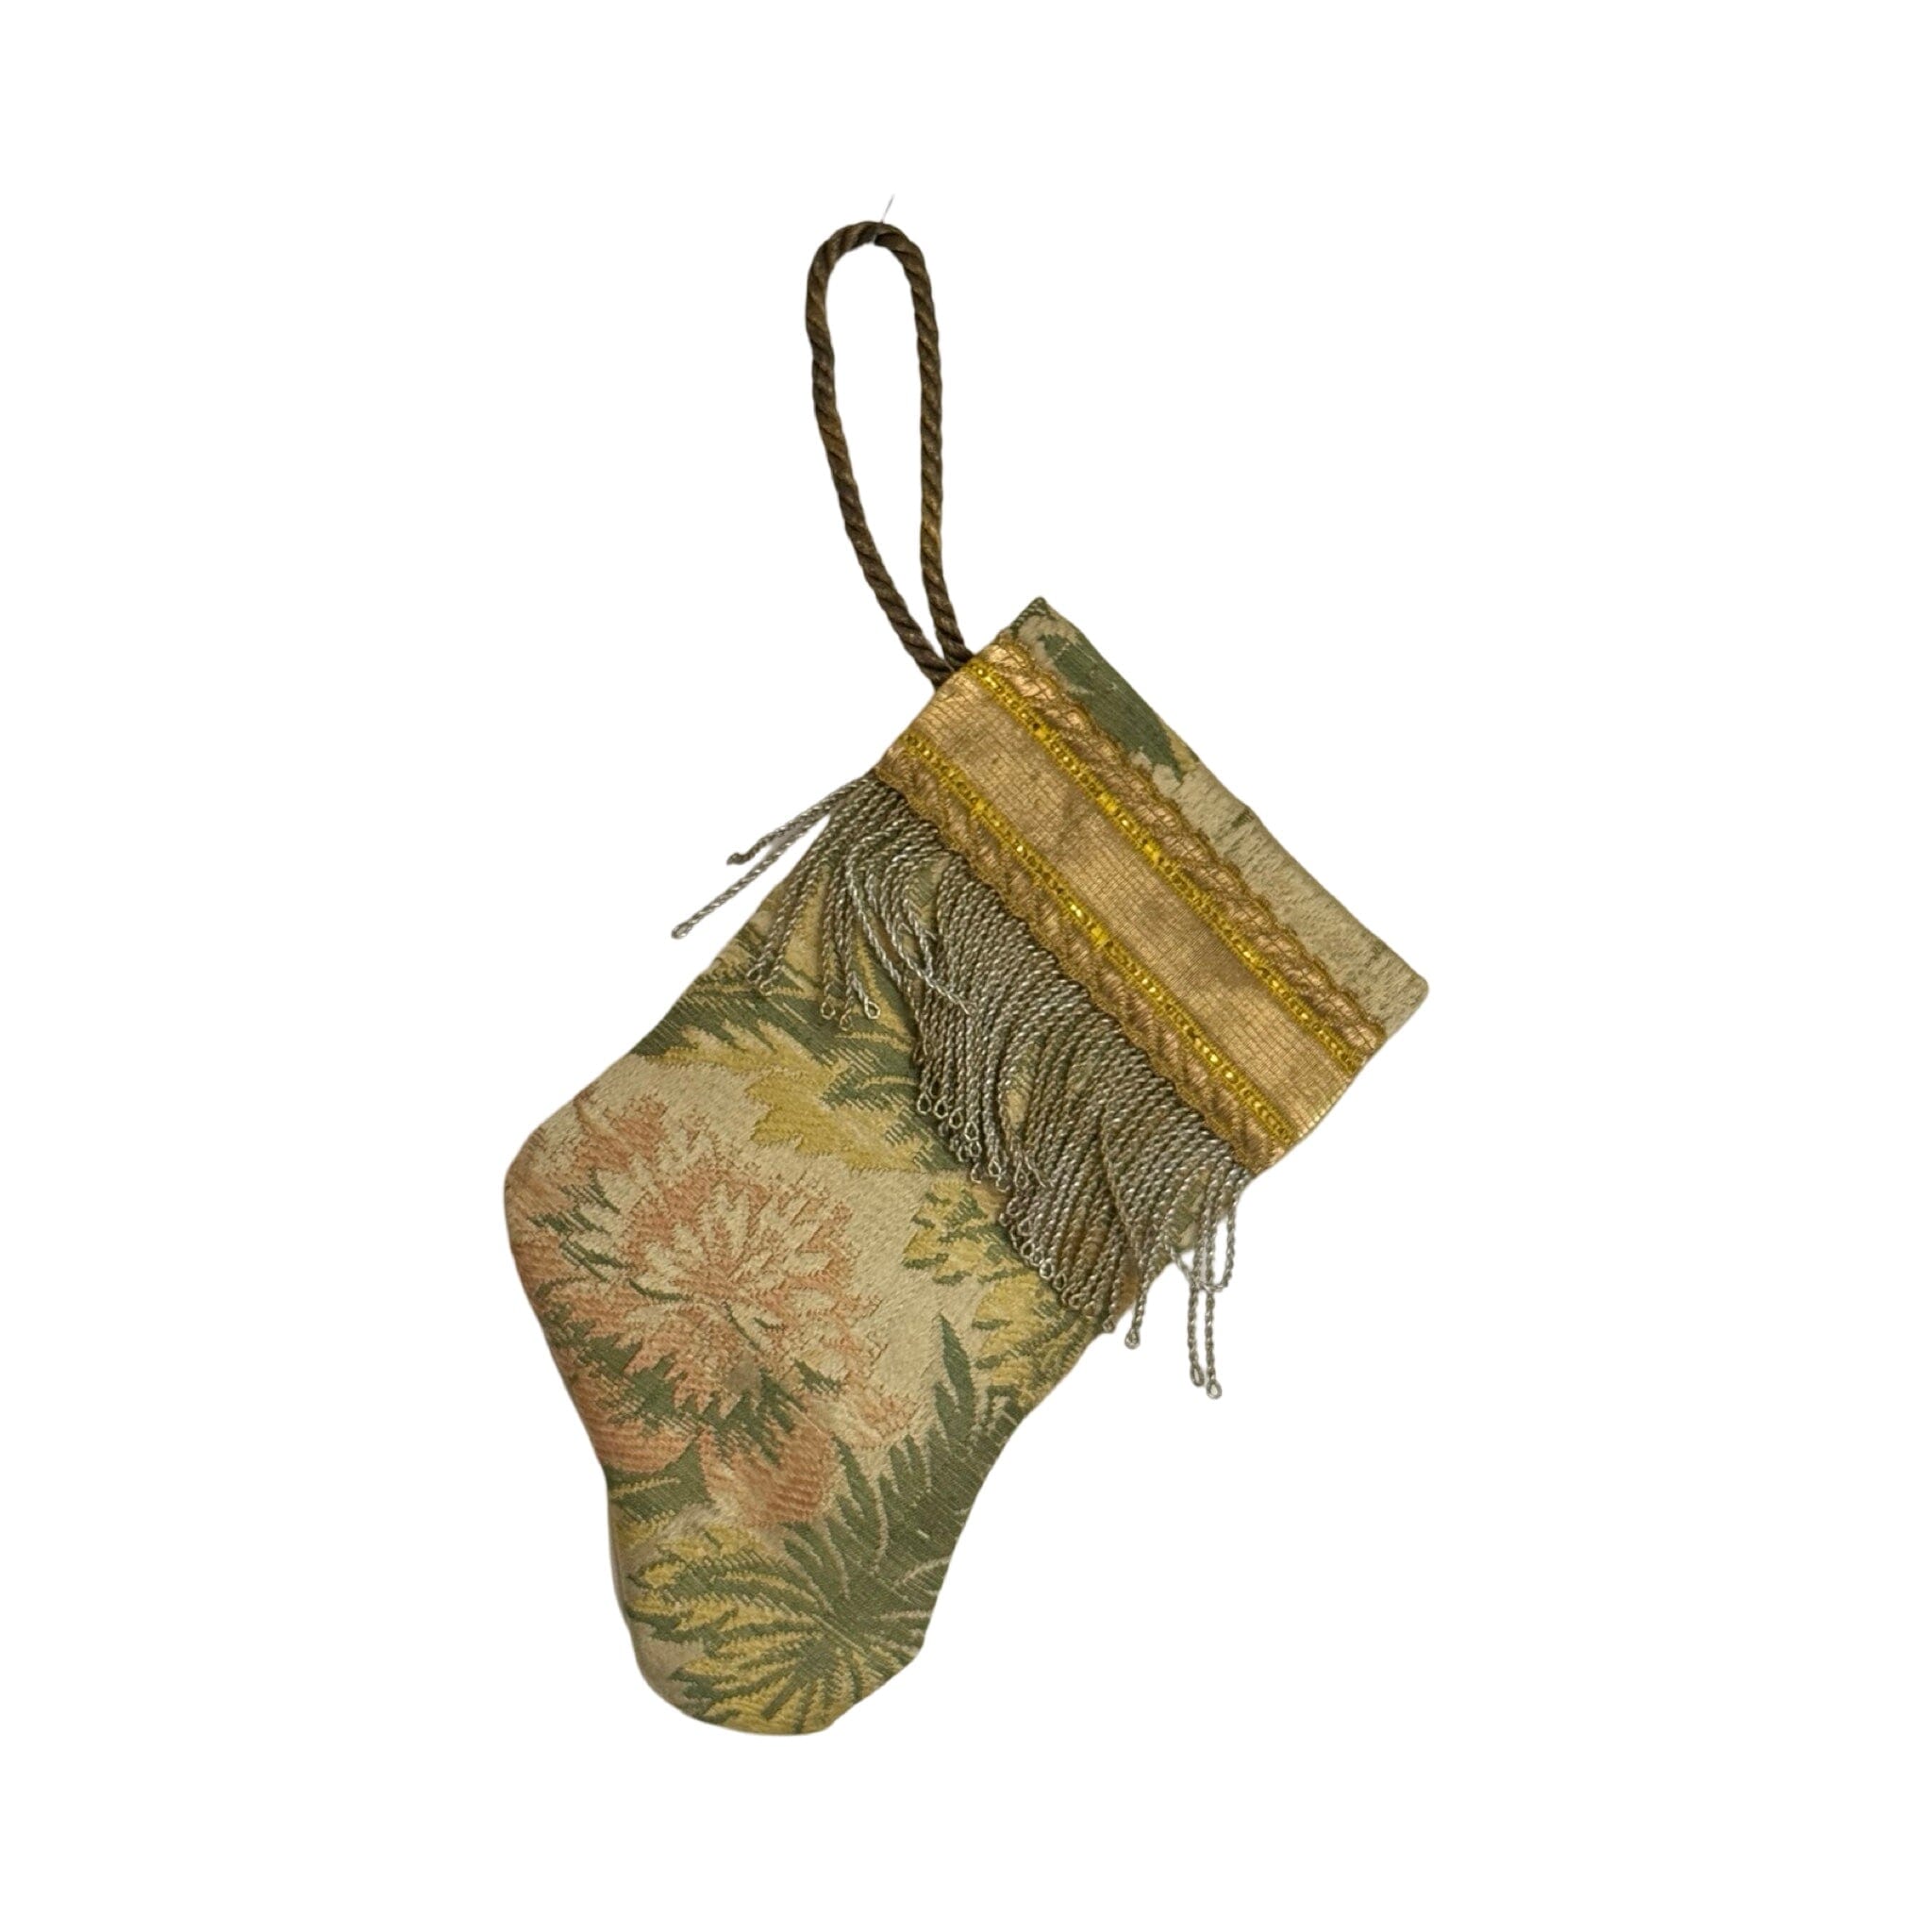 Handmade Mini Stocking Made From Vintage Fabric and Trims- Green and Gold Ornament B. Viz Design H 